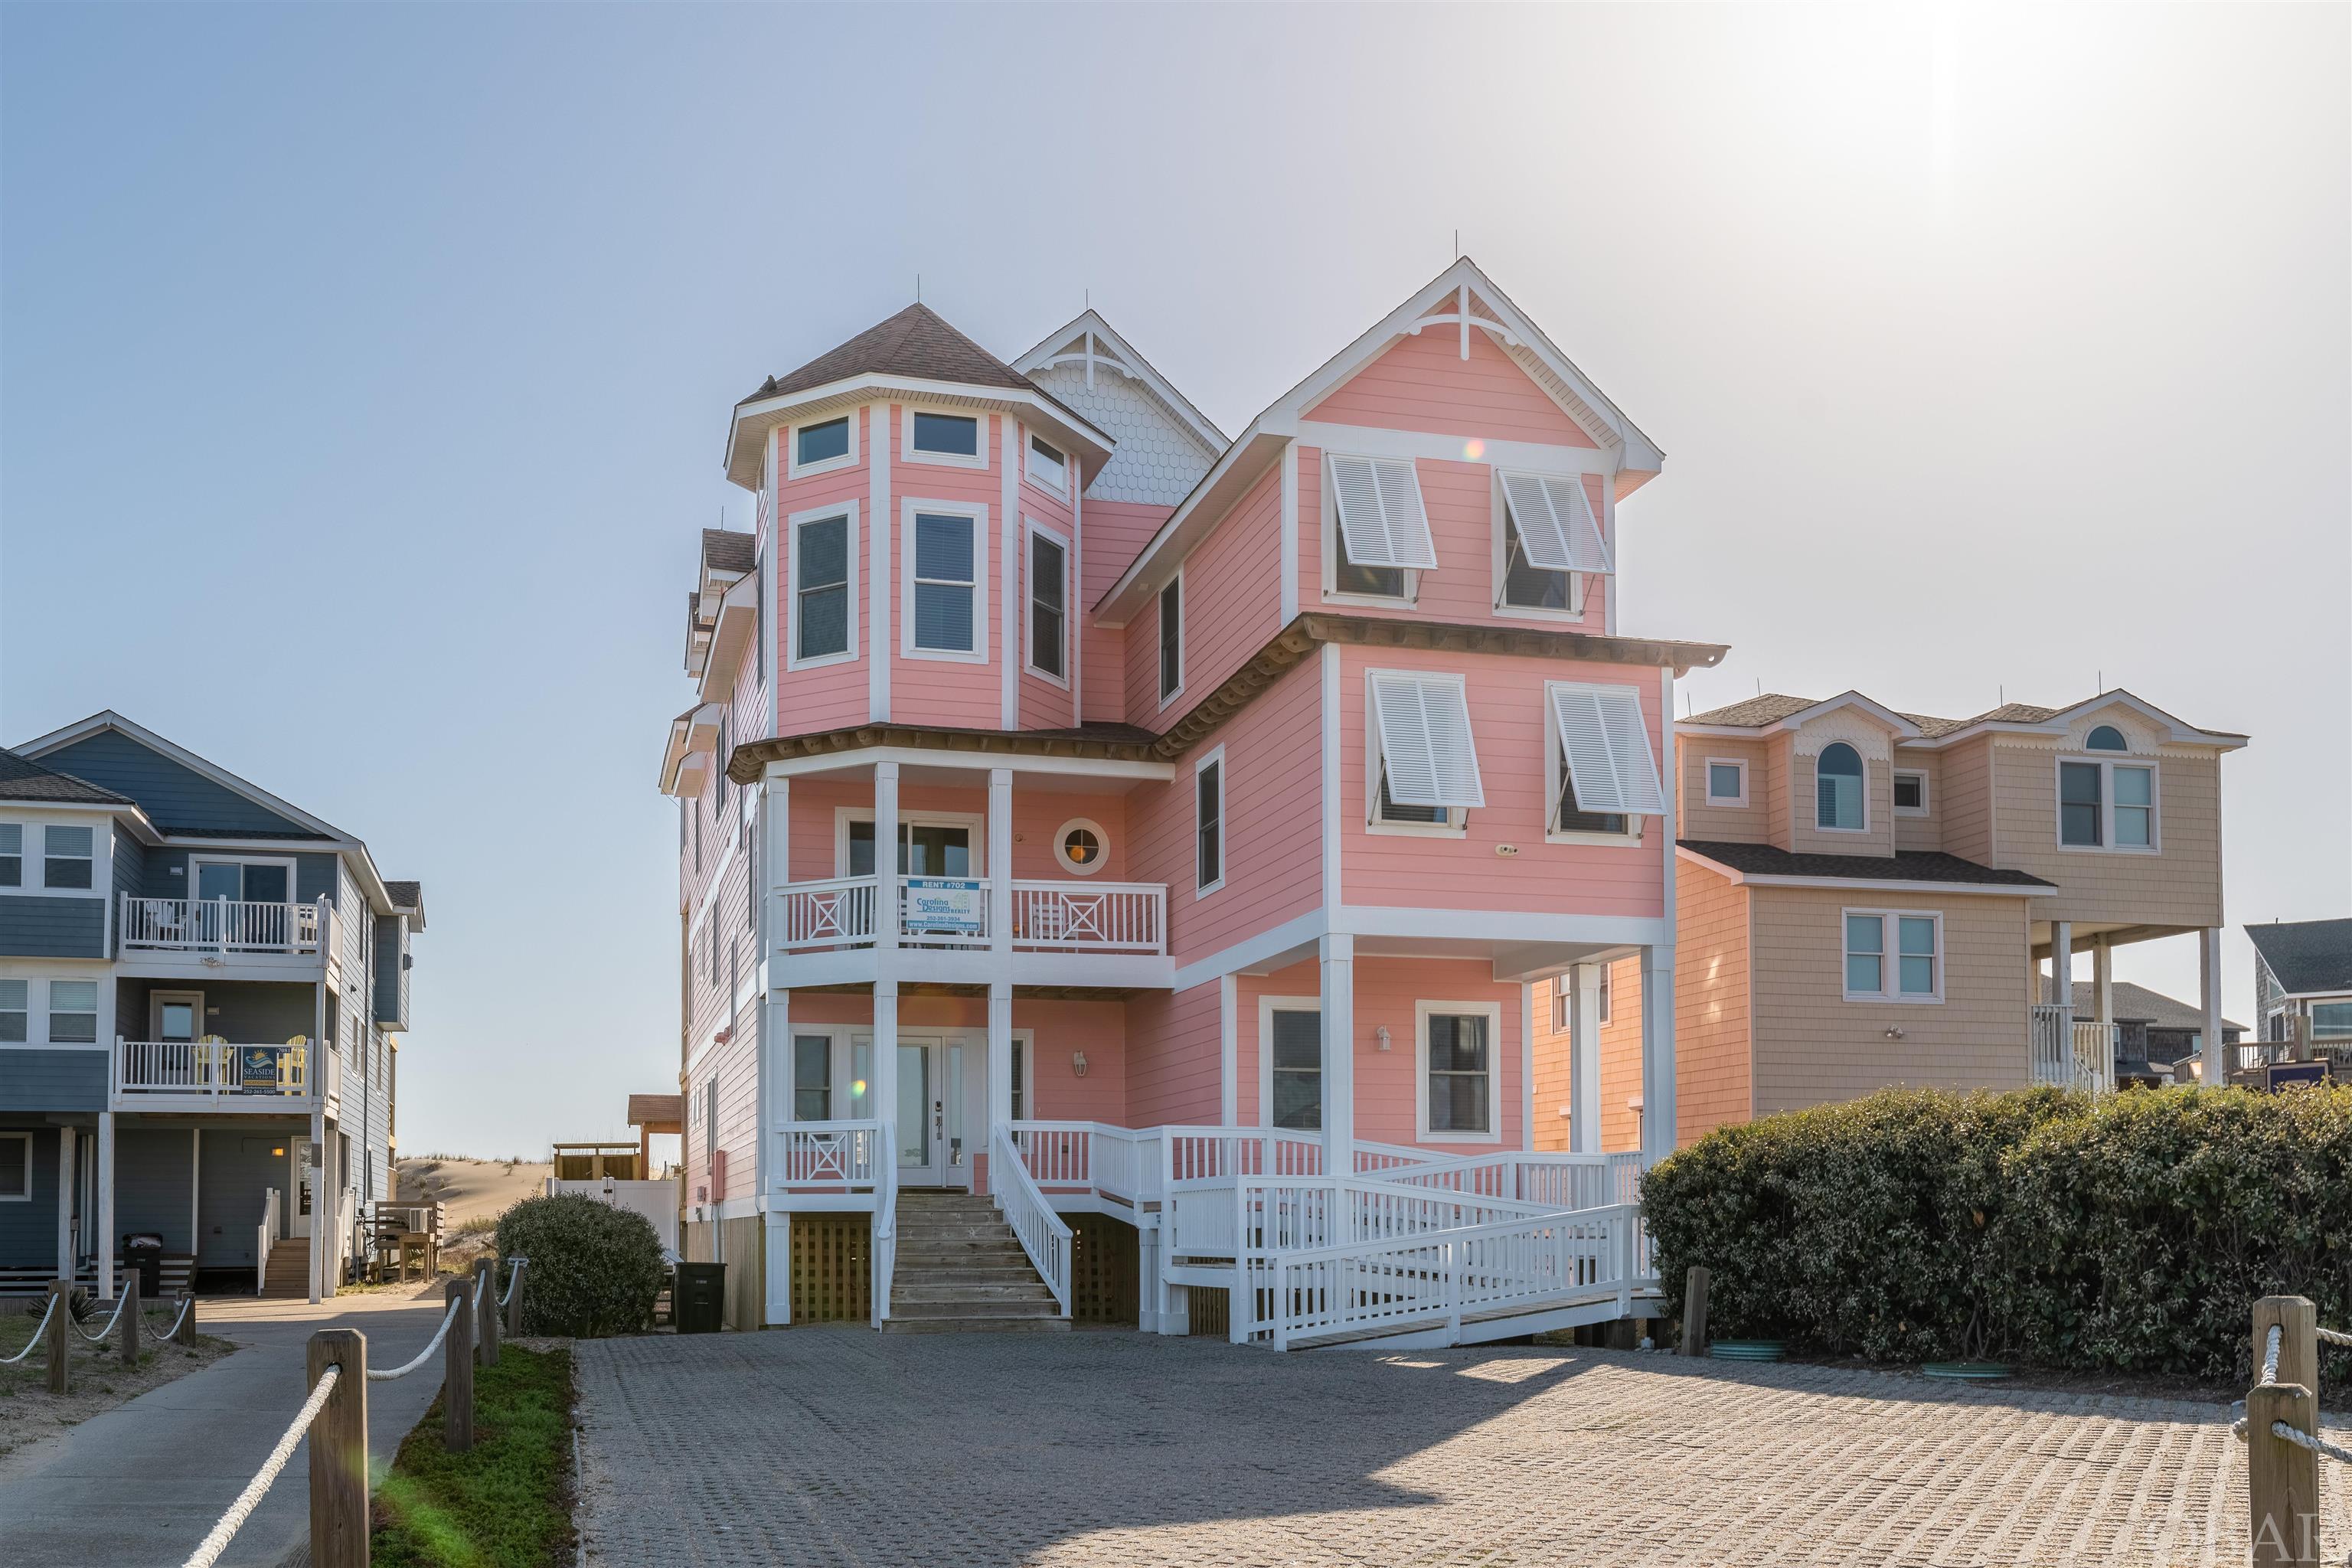 9529 Old Oregon Inlet Road, Nags Head, NC 27959, 8 Bedrooms Bedrooms, ,9 BathroomsBathrooms,Residential,For sale,Old Oregon Inlet Road,118357